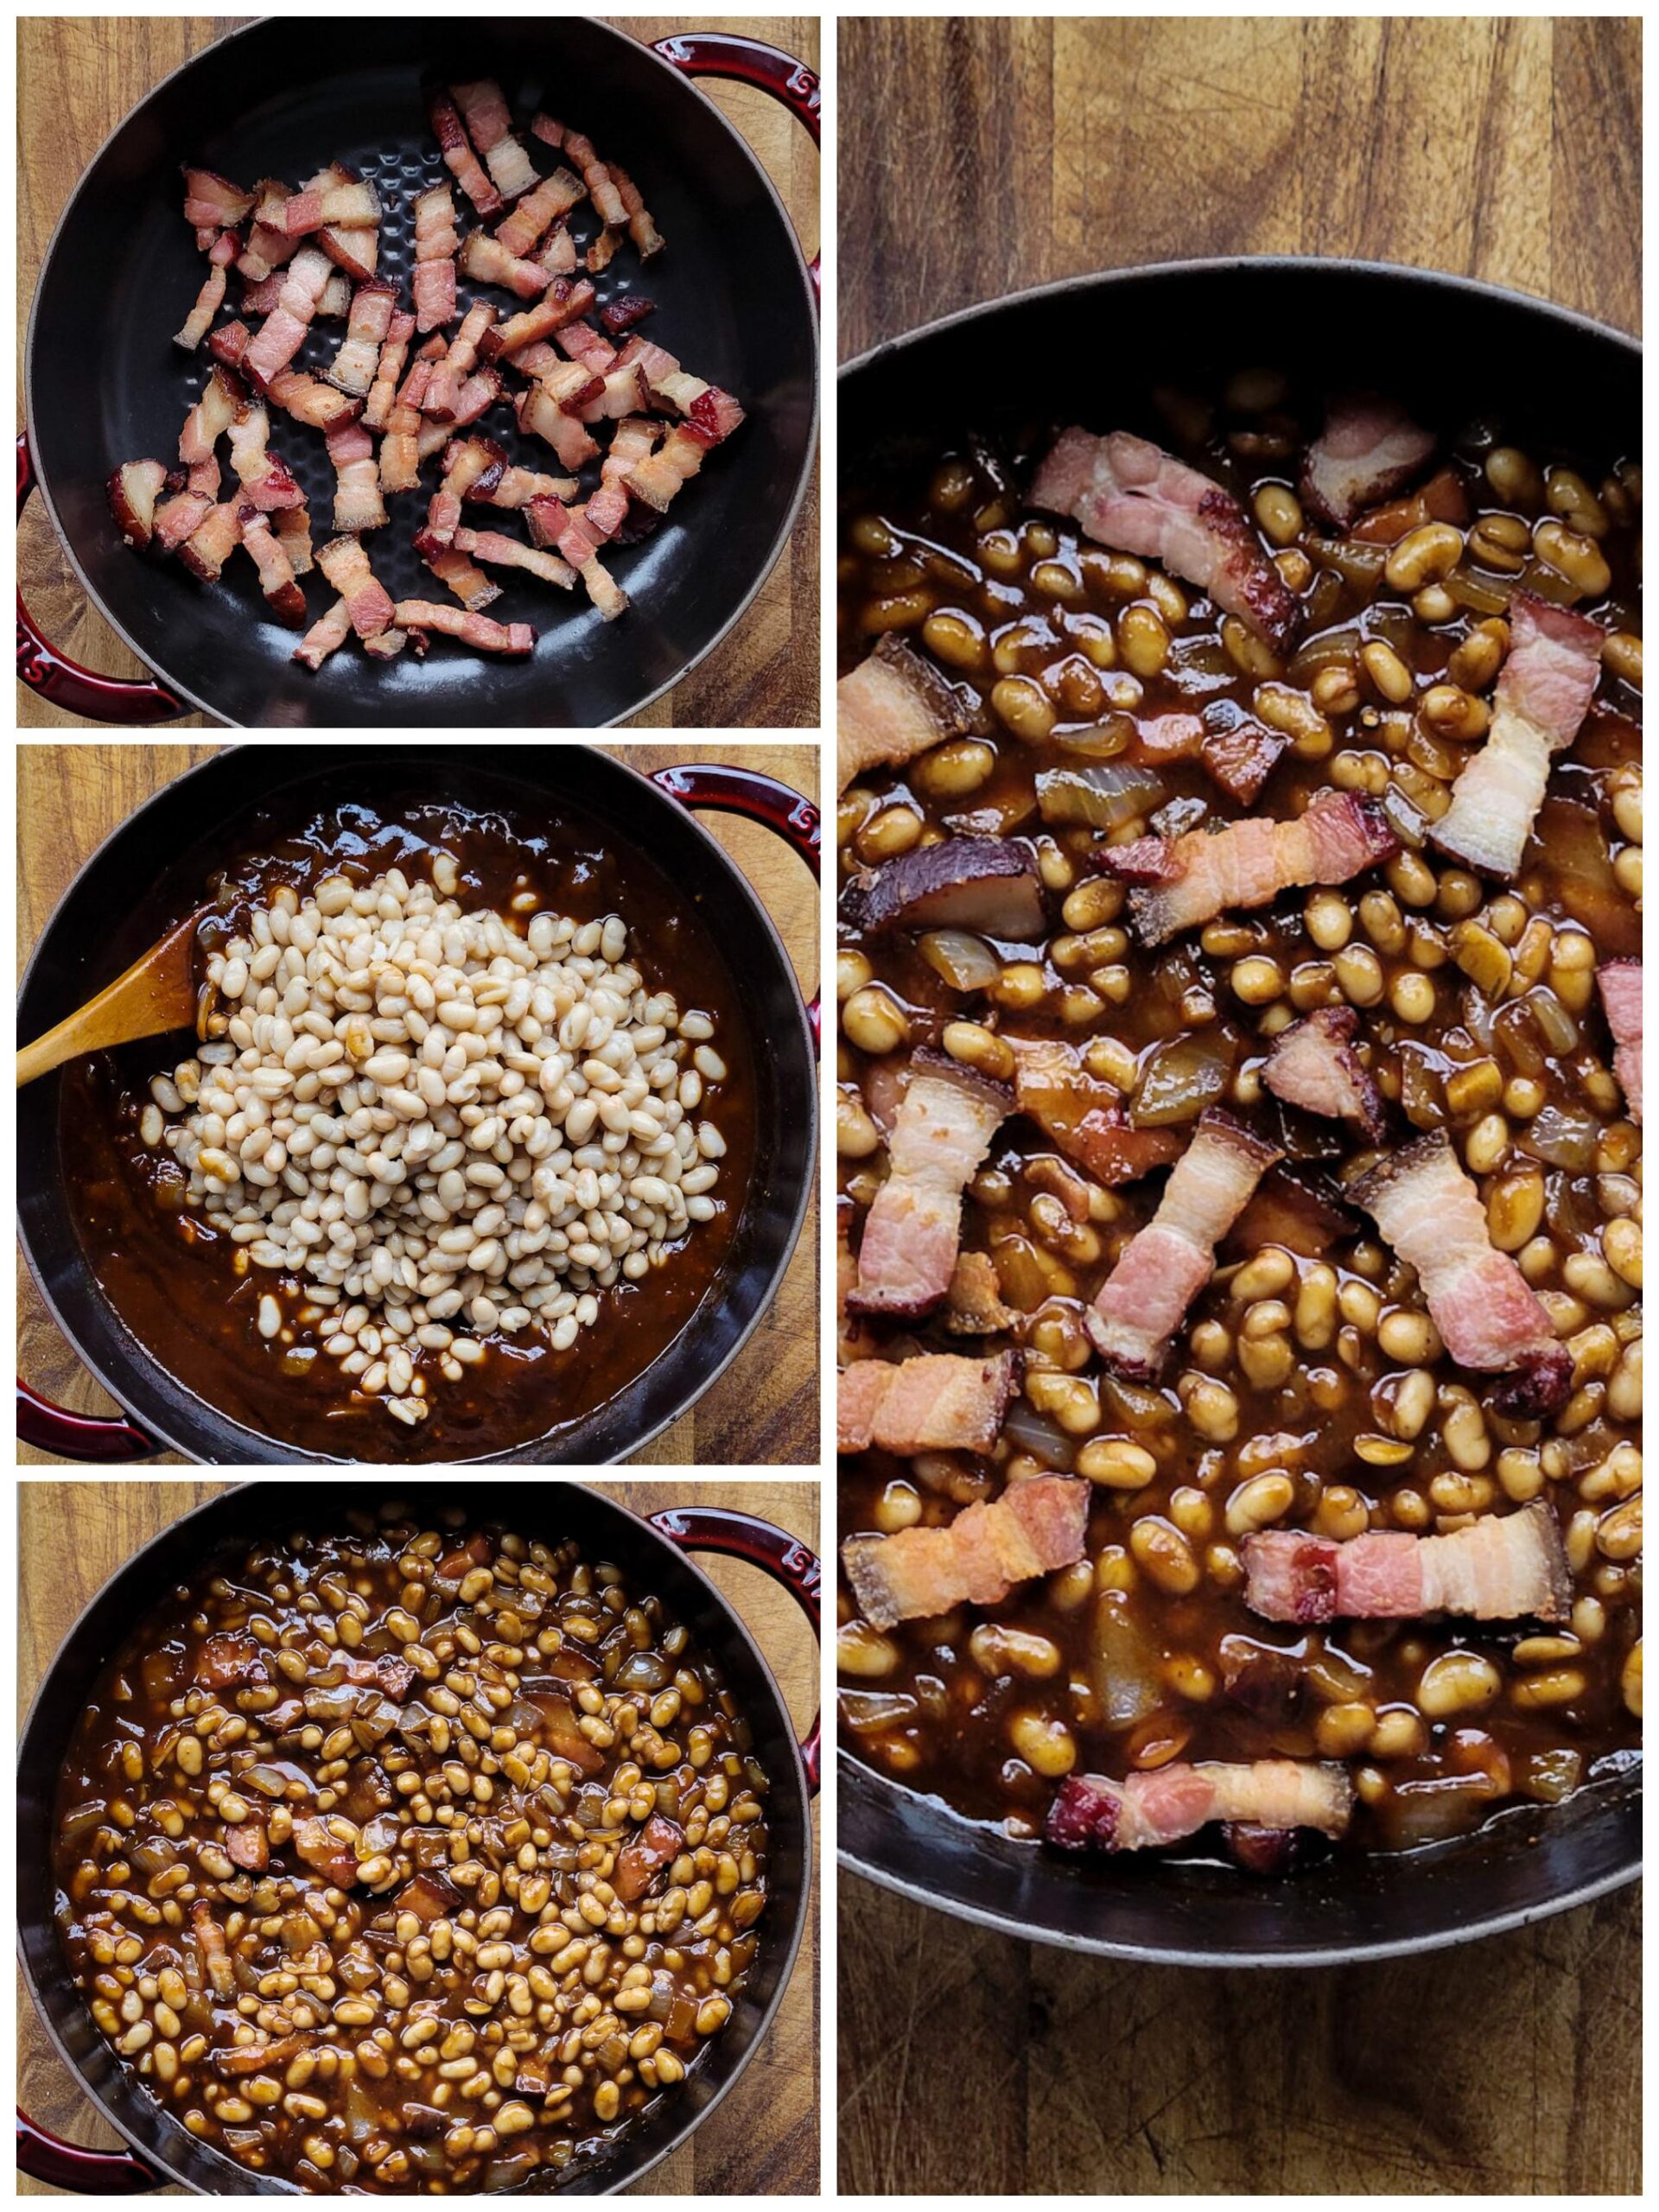 Collage showing the steps of making Classic Baked Beans.